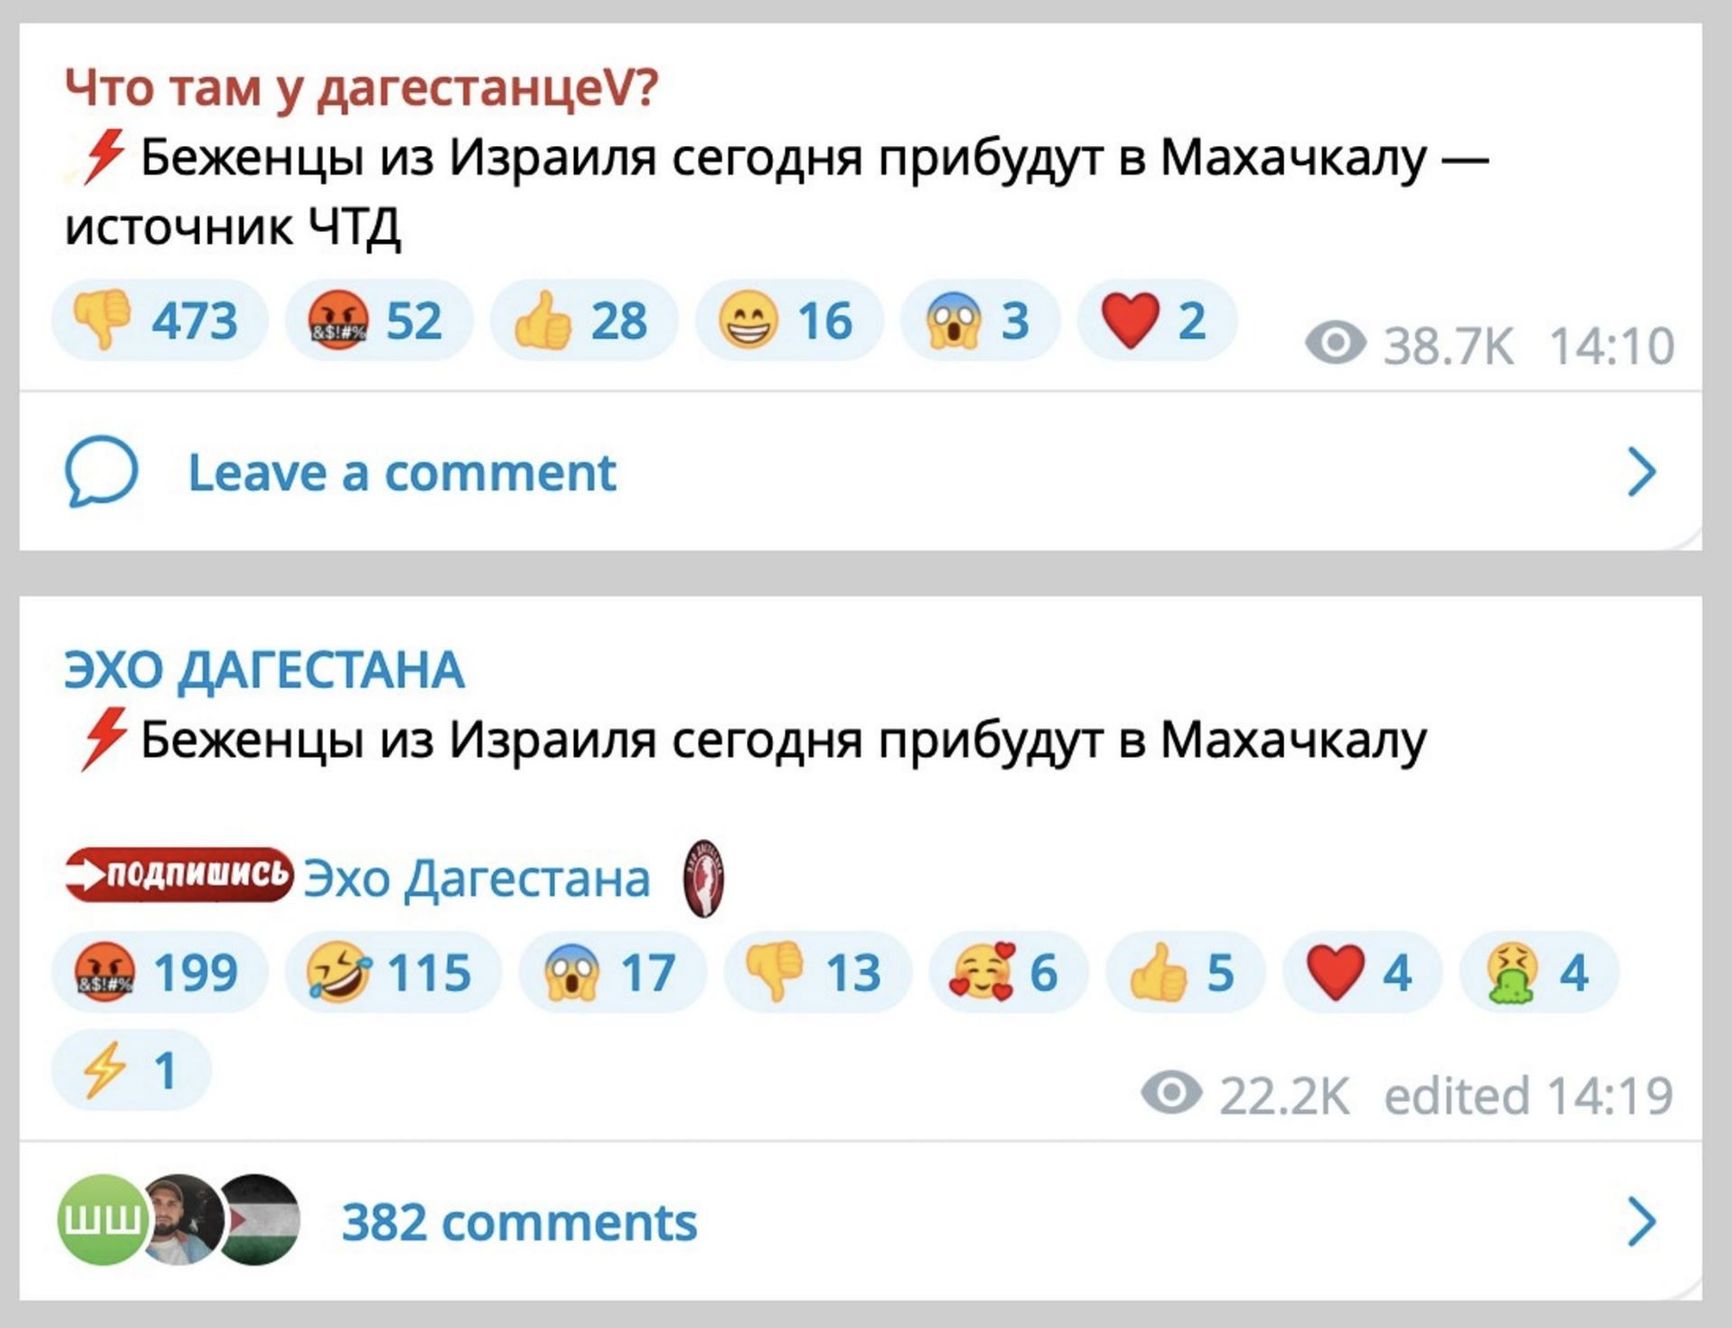 “Refugees from Israel will arrive in Makhachkala today” — screenshots of messages posted on Ekho Dagestan and Chto Tam U Dagestantsev?, October 11